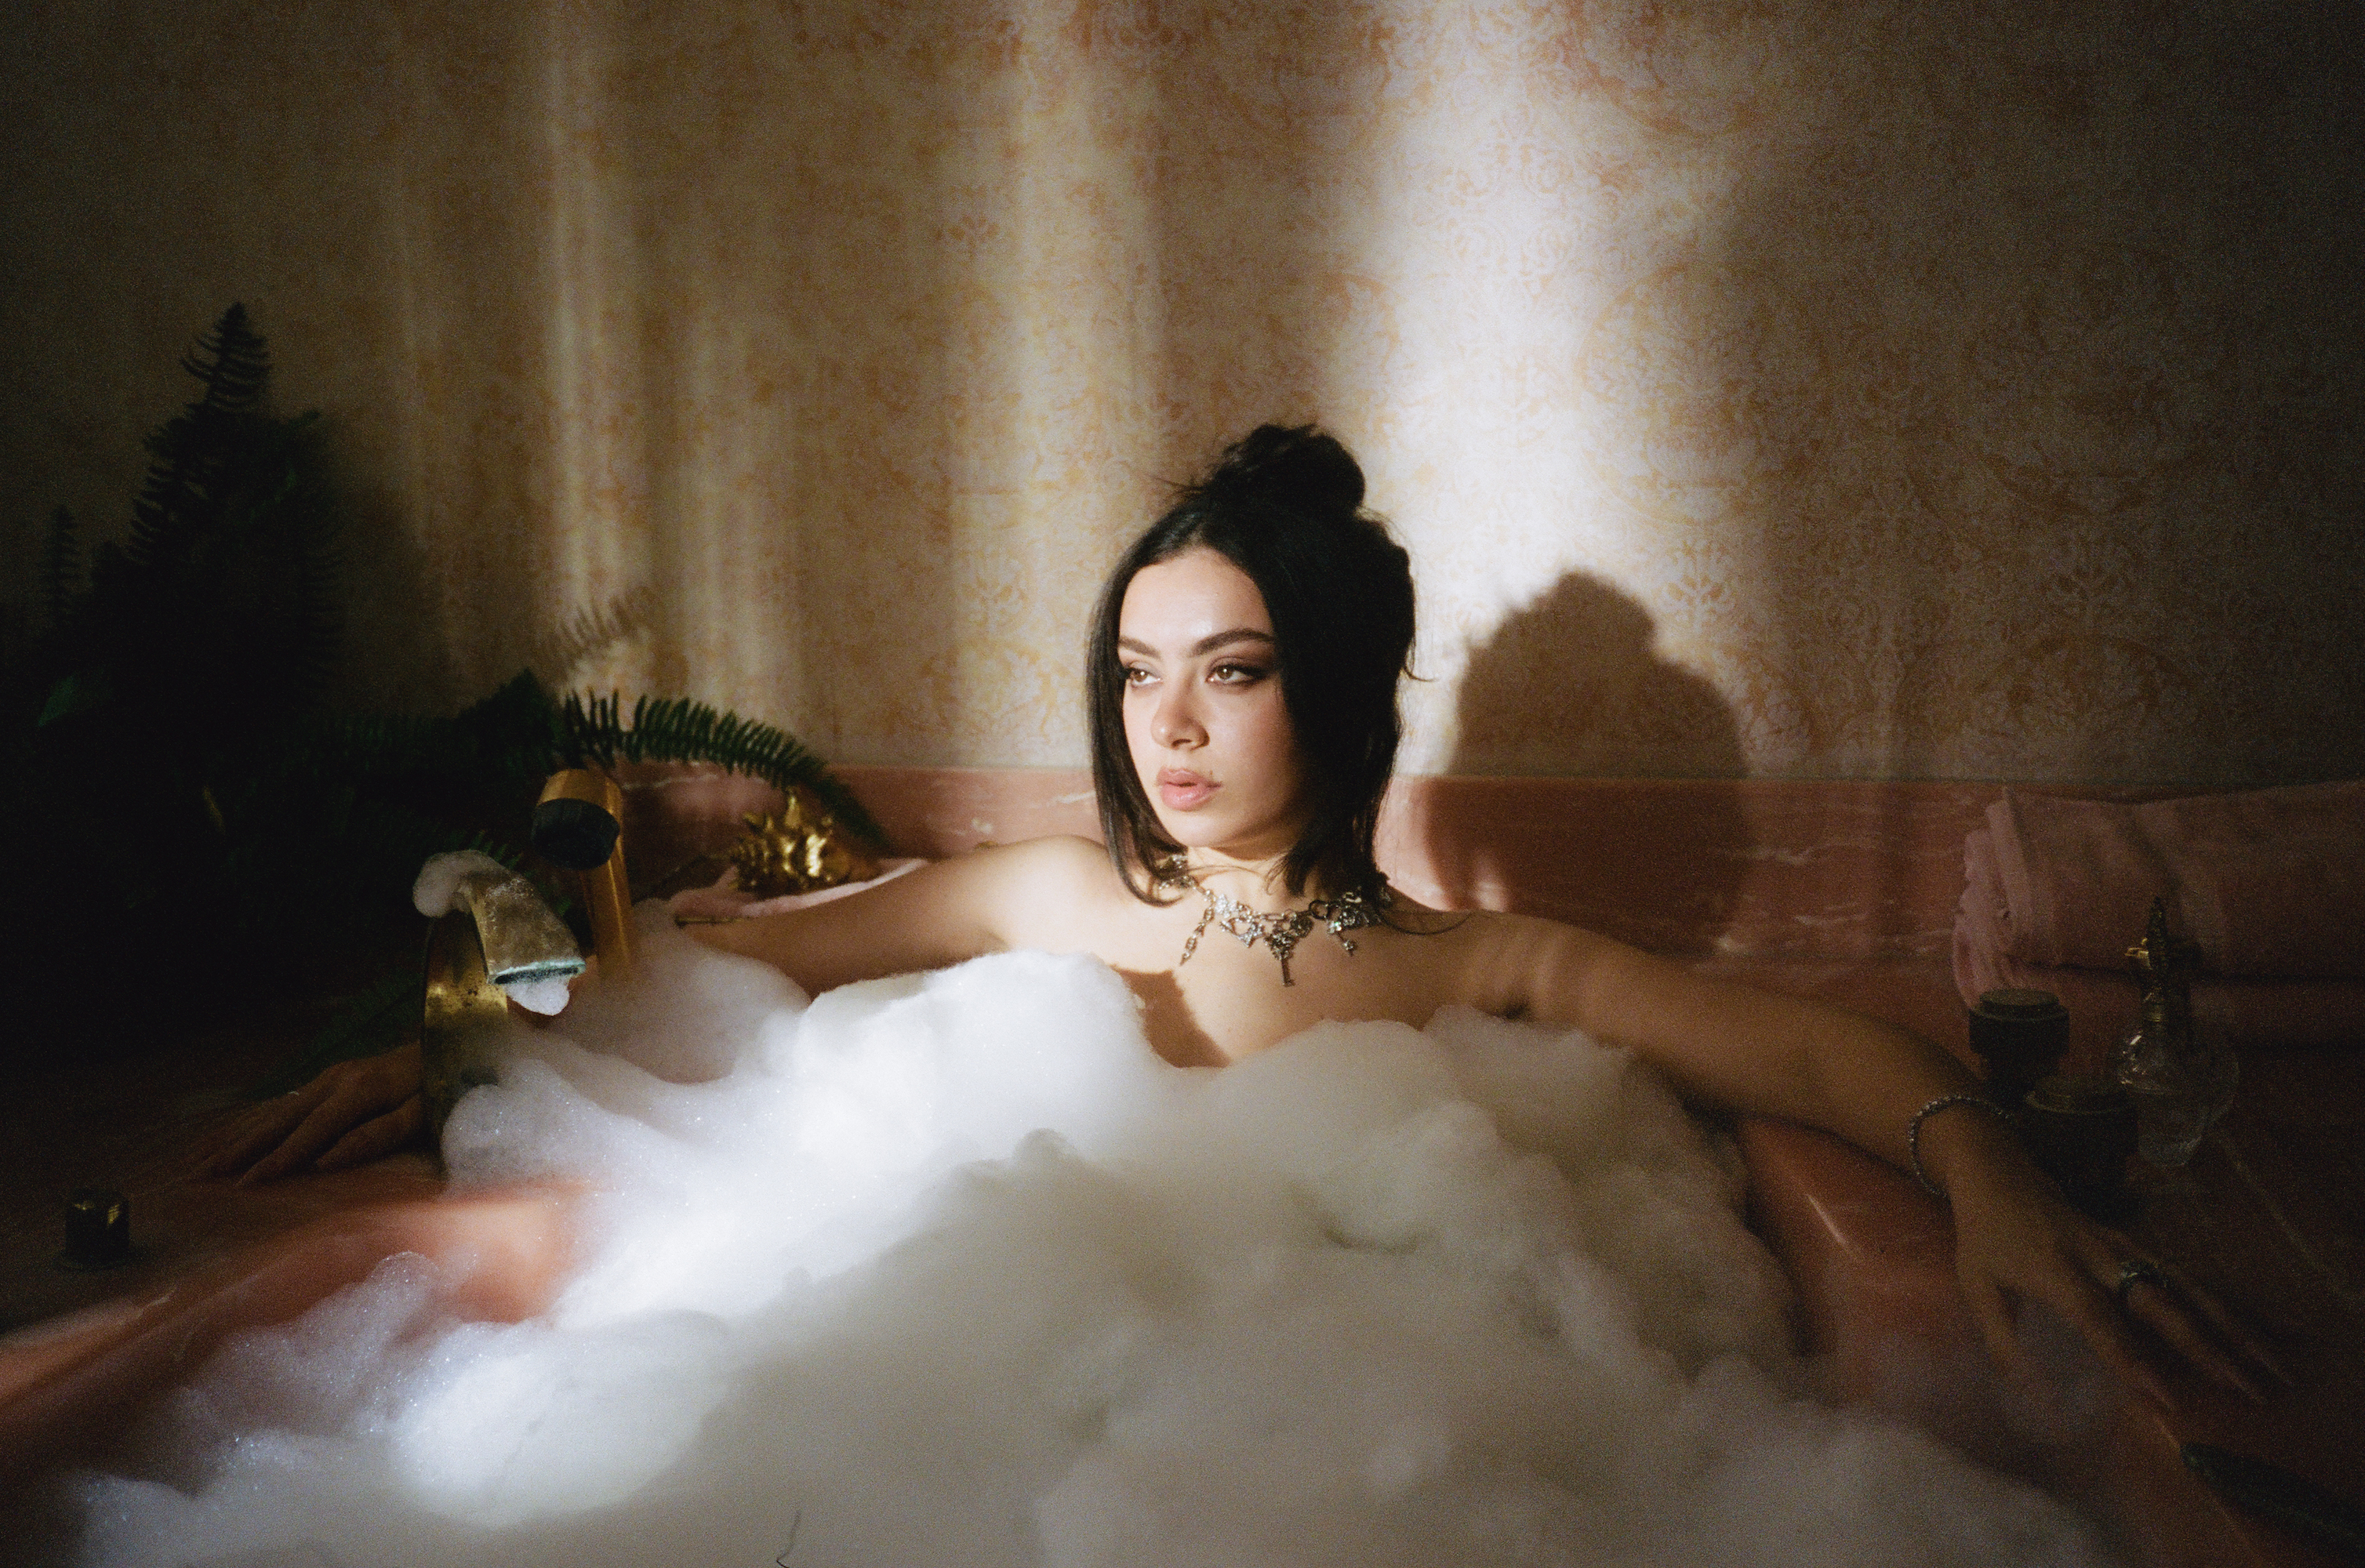 Charli XCX in the bath in the Used To Know Me music video